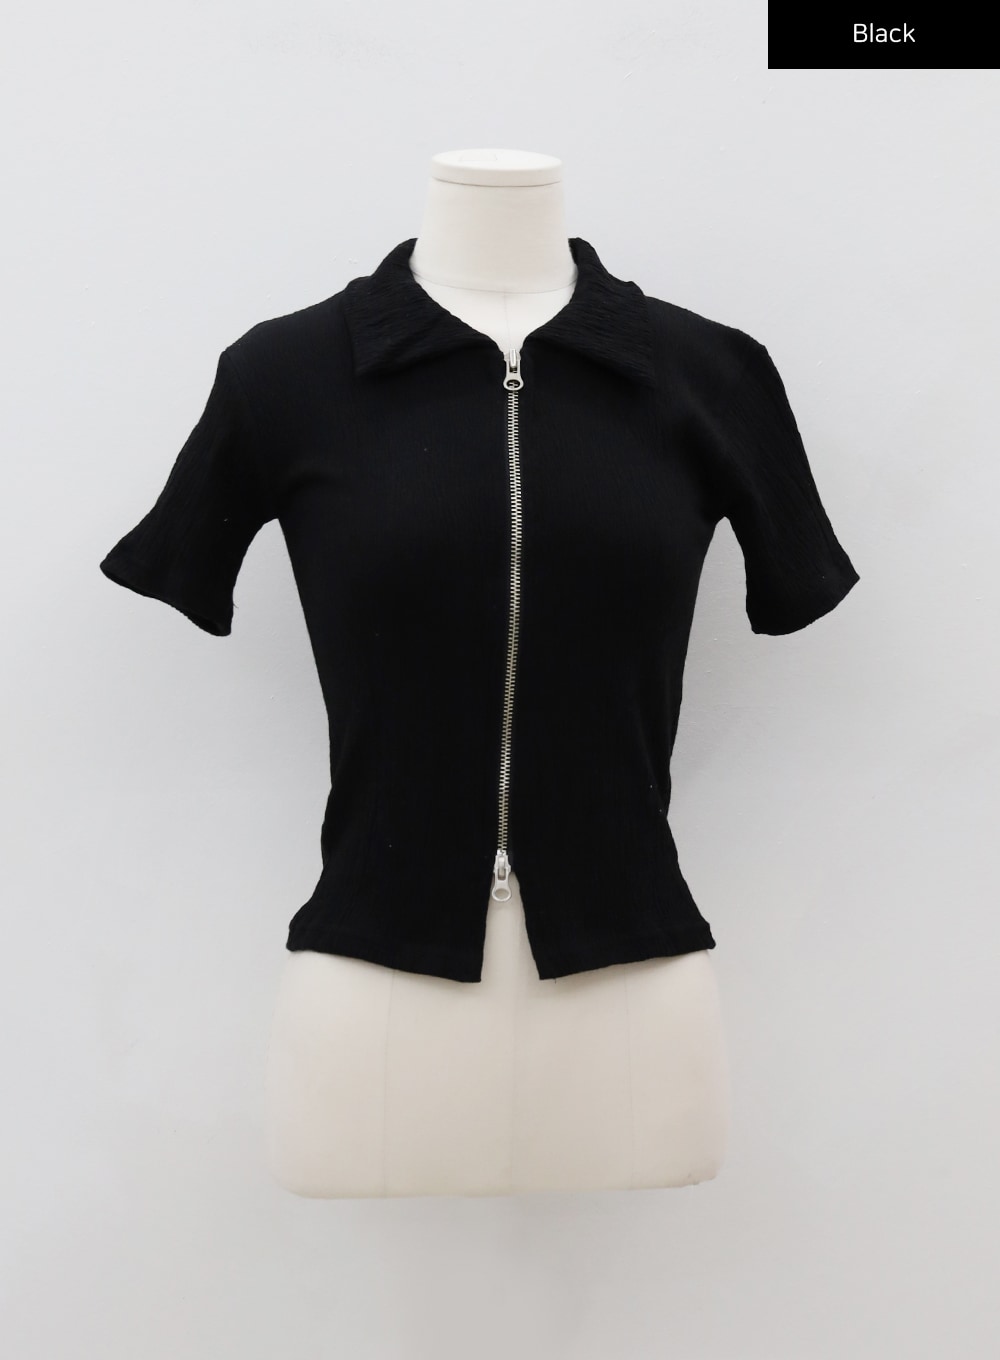 Two-Way Zip-Up Collared Top BJ17